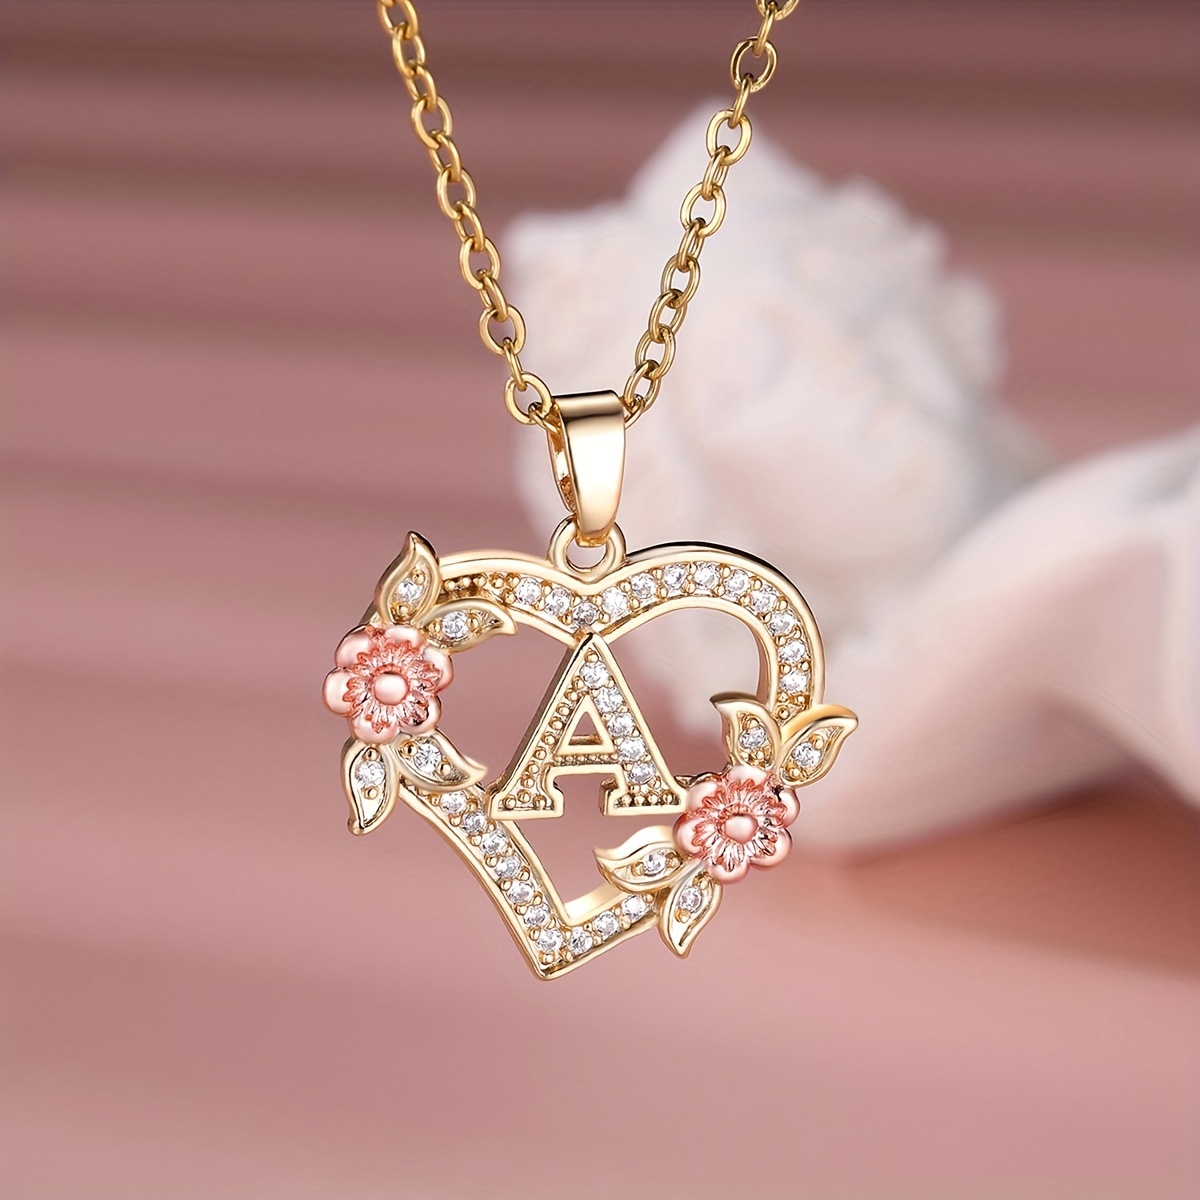 

Inlaid Shiny Zircon Love Heart Butterfly Letter Pendant Necklace Adjustable Copper Neck Jewelry Birthday Gift